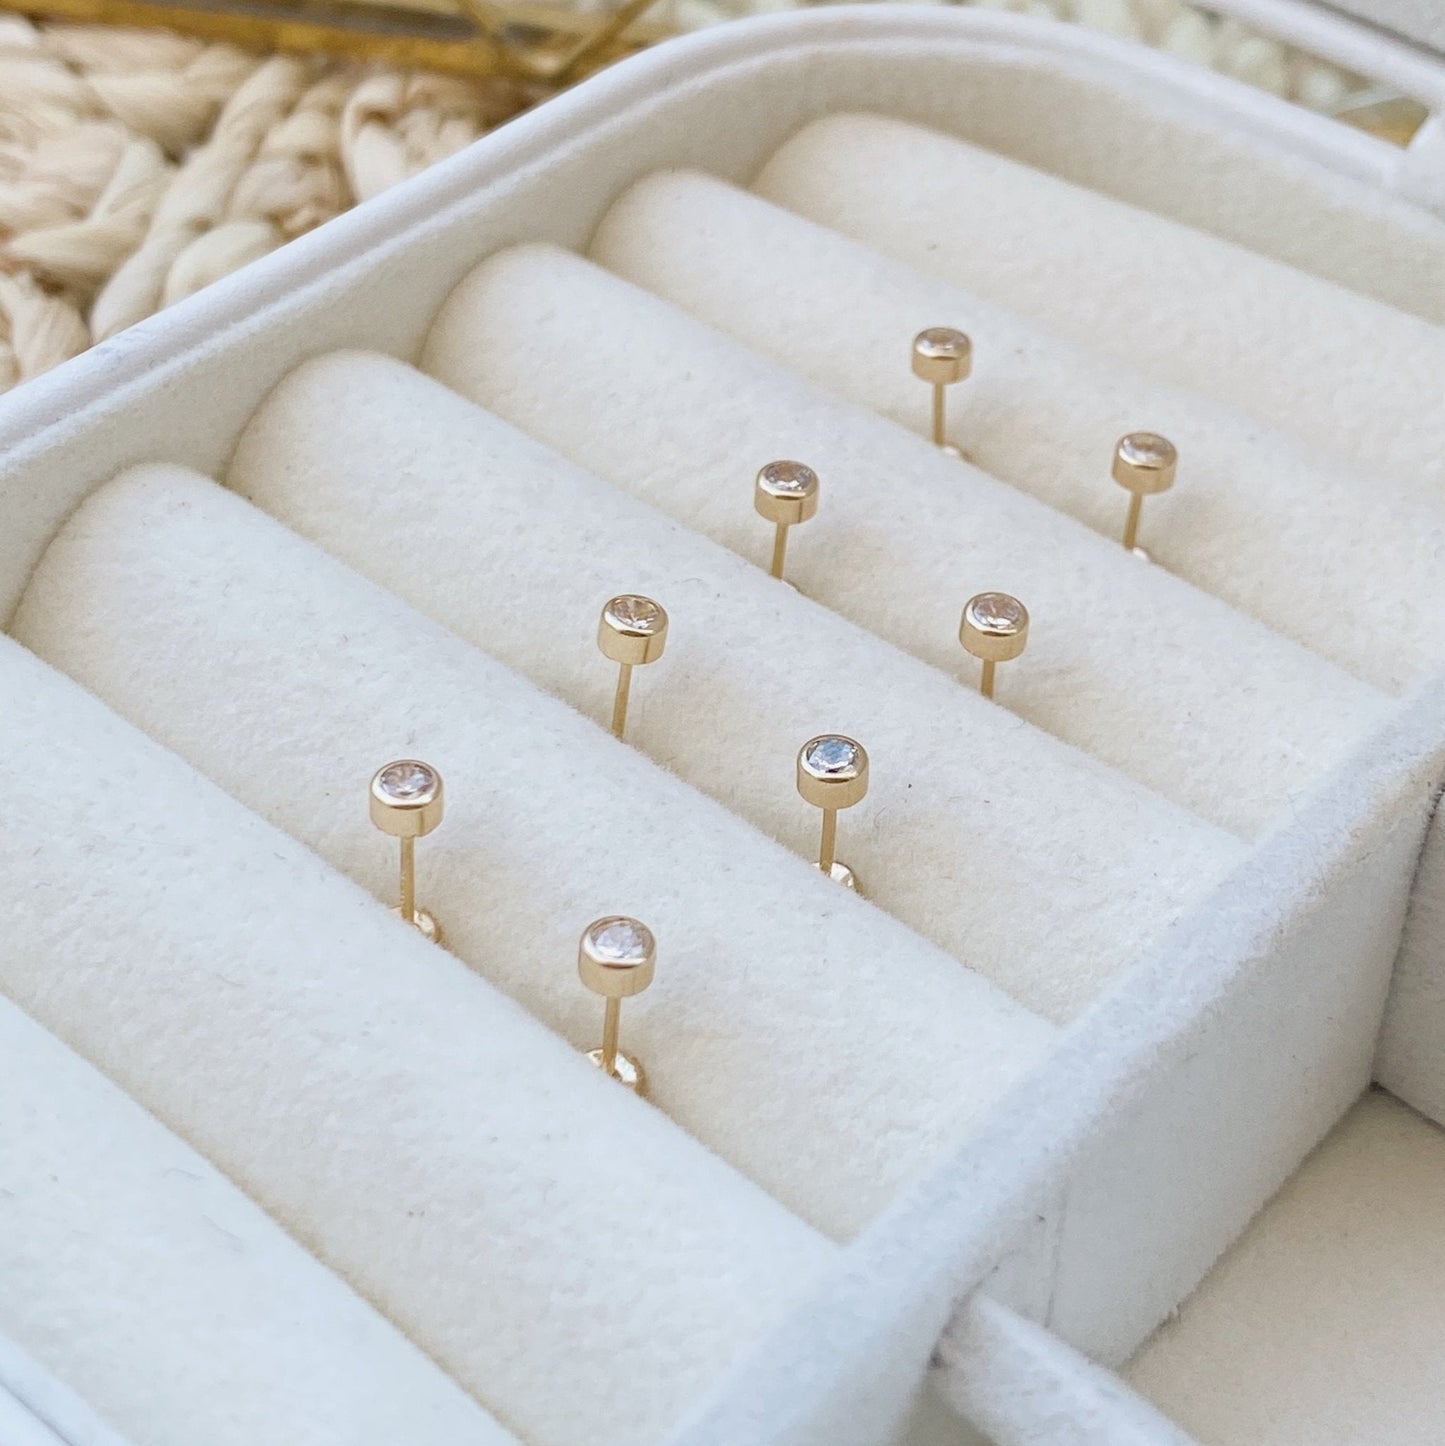 These 14K gold bezel stud earrings are perfect for adding a little something to your everyday outfit. They are dainty and minimal, but still make a statement! These studs are great for the helix piercing and other piercings that need a really flat back.